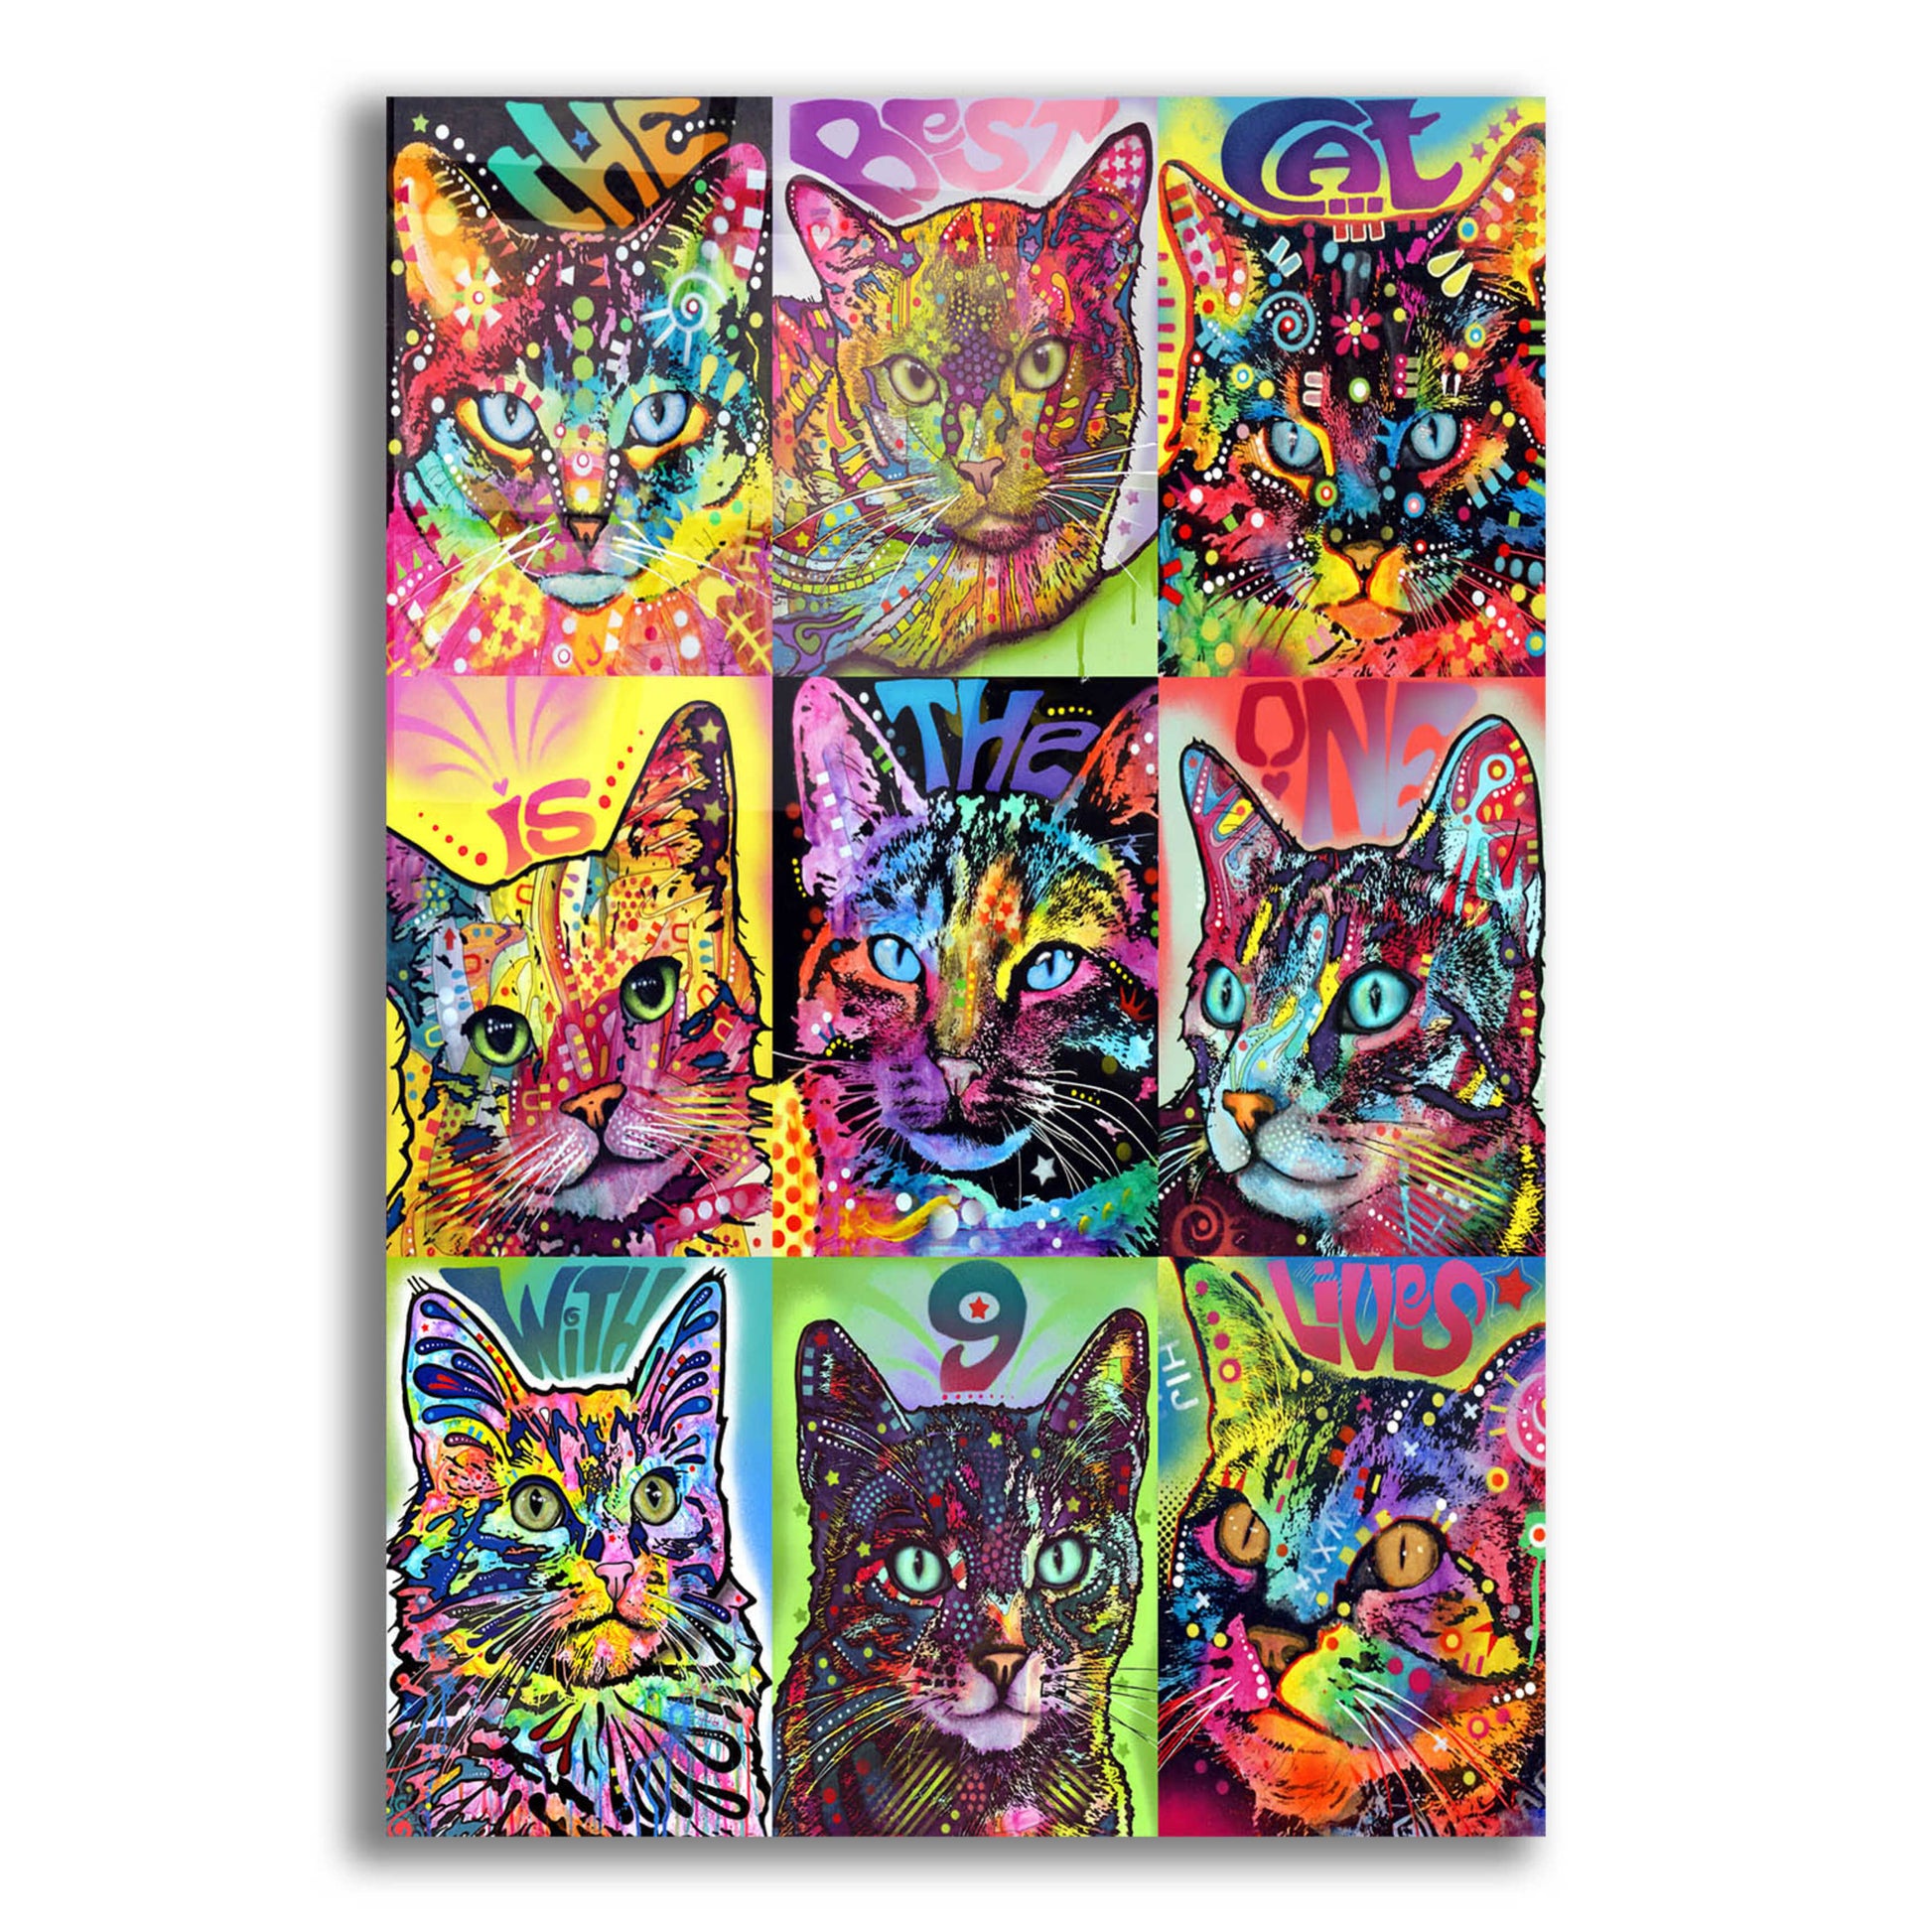 Epic Art 'Nine Up of Cats' by Dean Russo, Acrylic Glass Wall Art,12x16